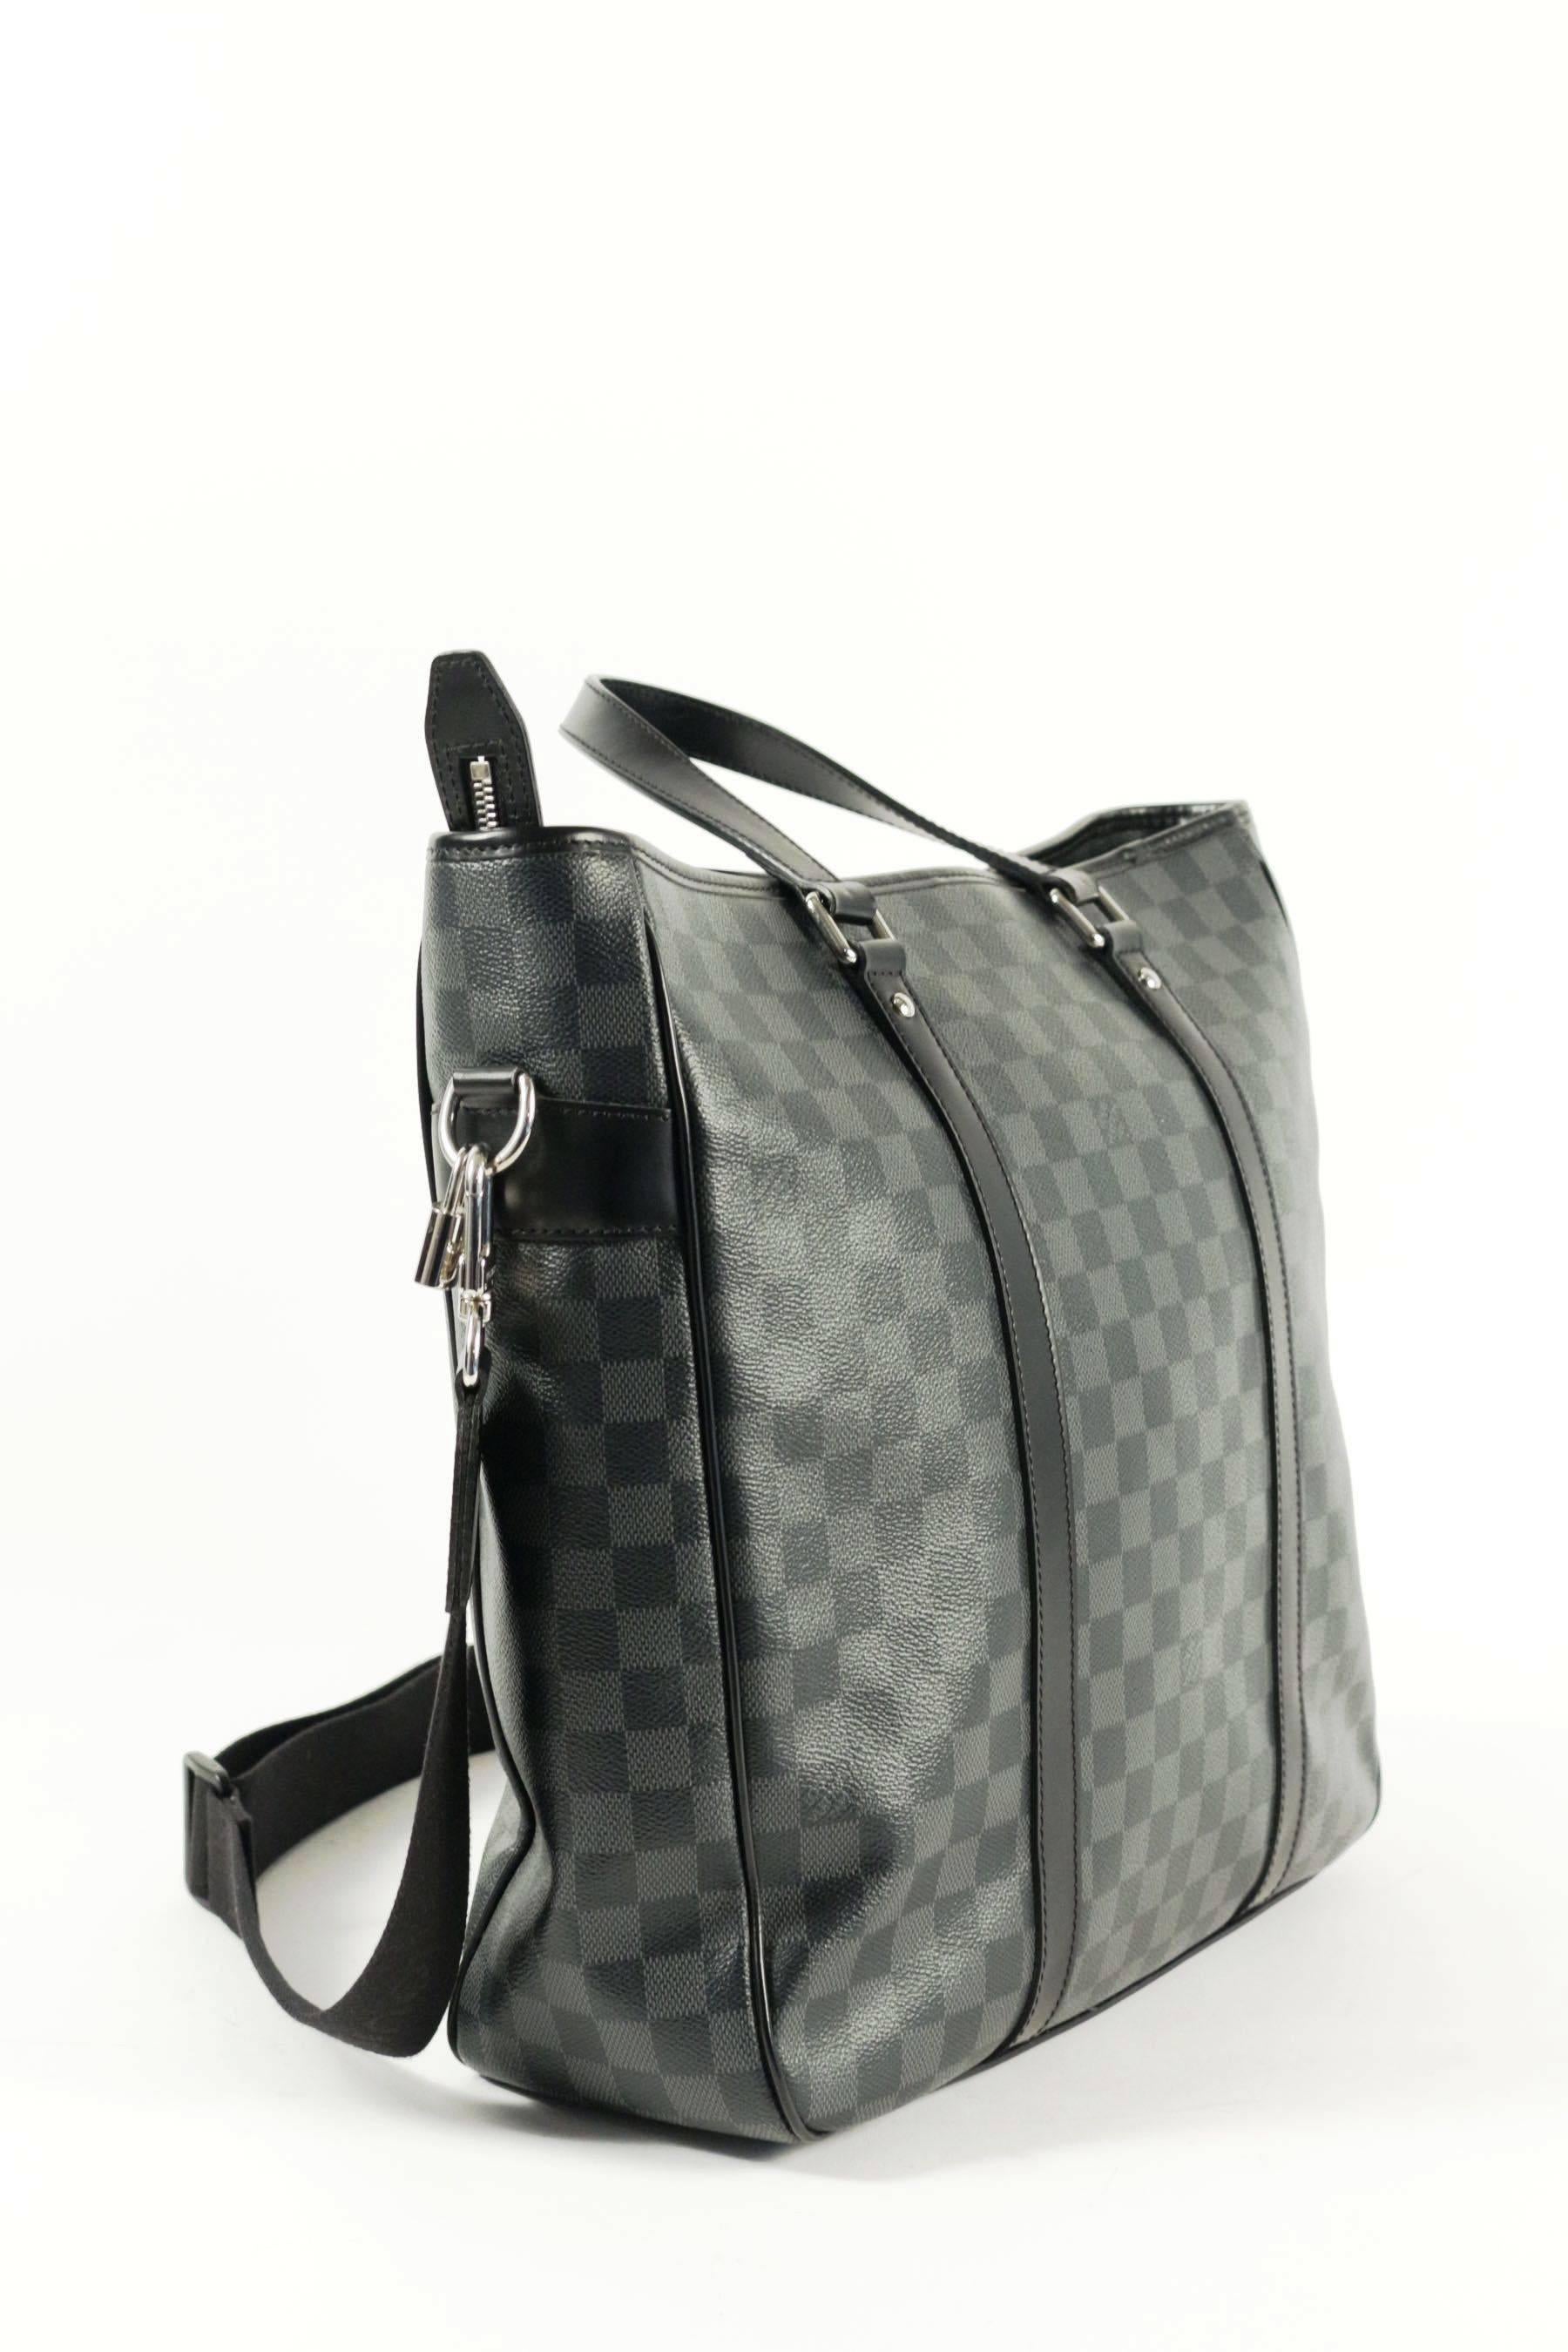 Pre-Owned Tadao Bag by Louis Vuitton, Grey and Black 3